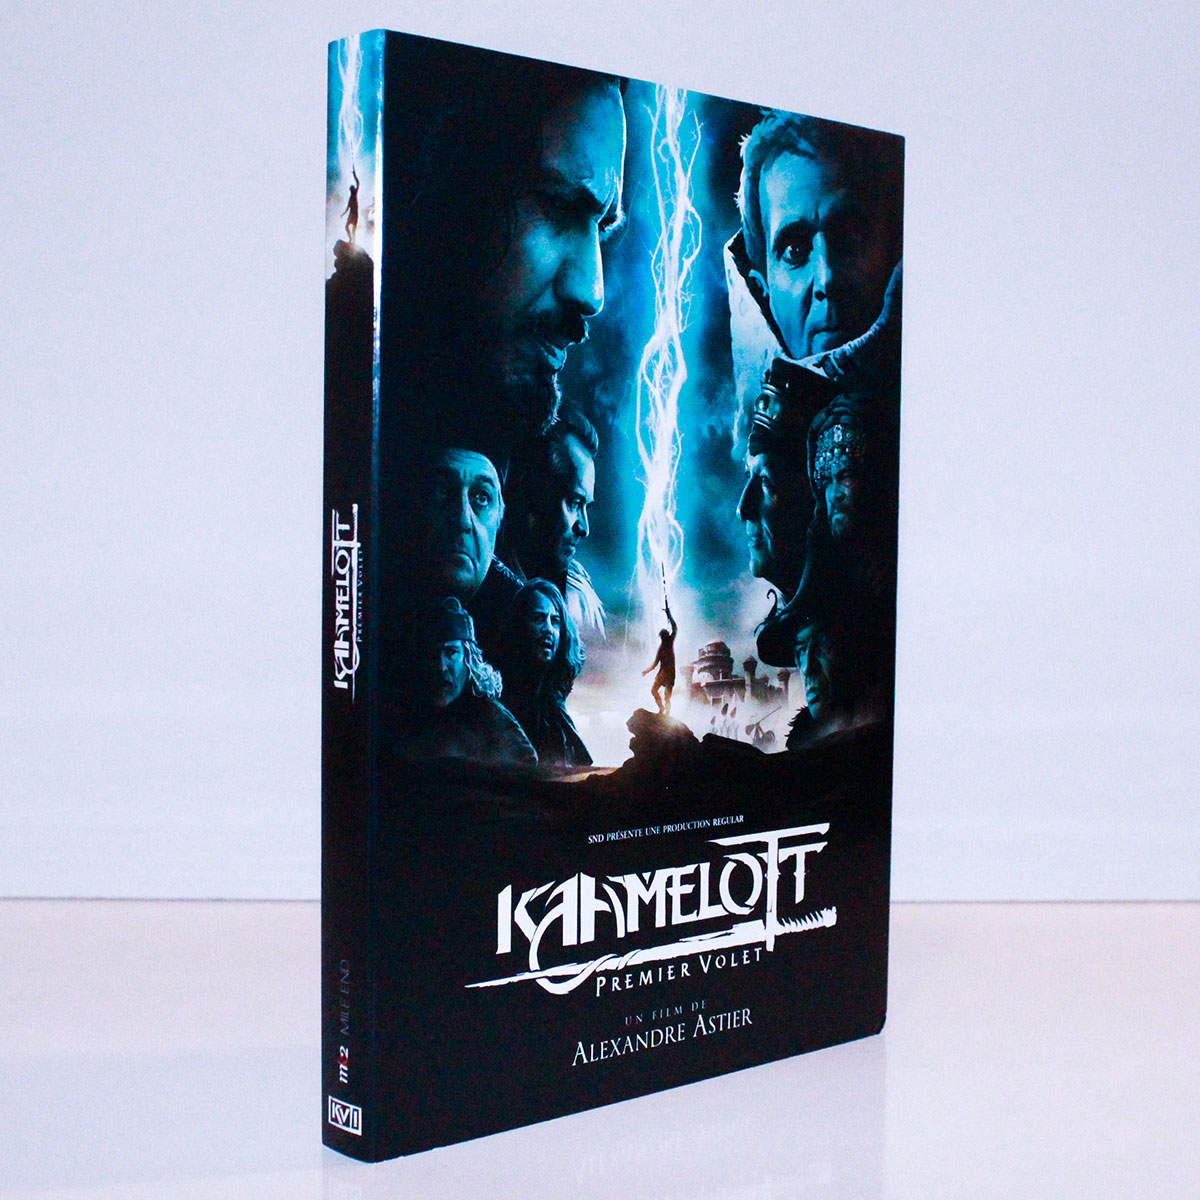 Printed O-Cards for DVD cases (offset print)